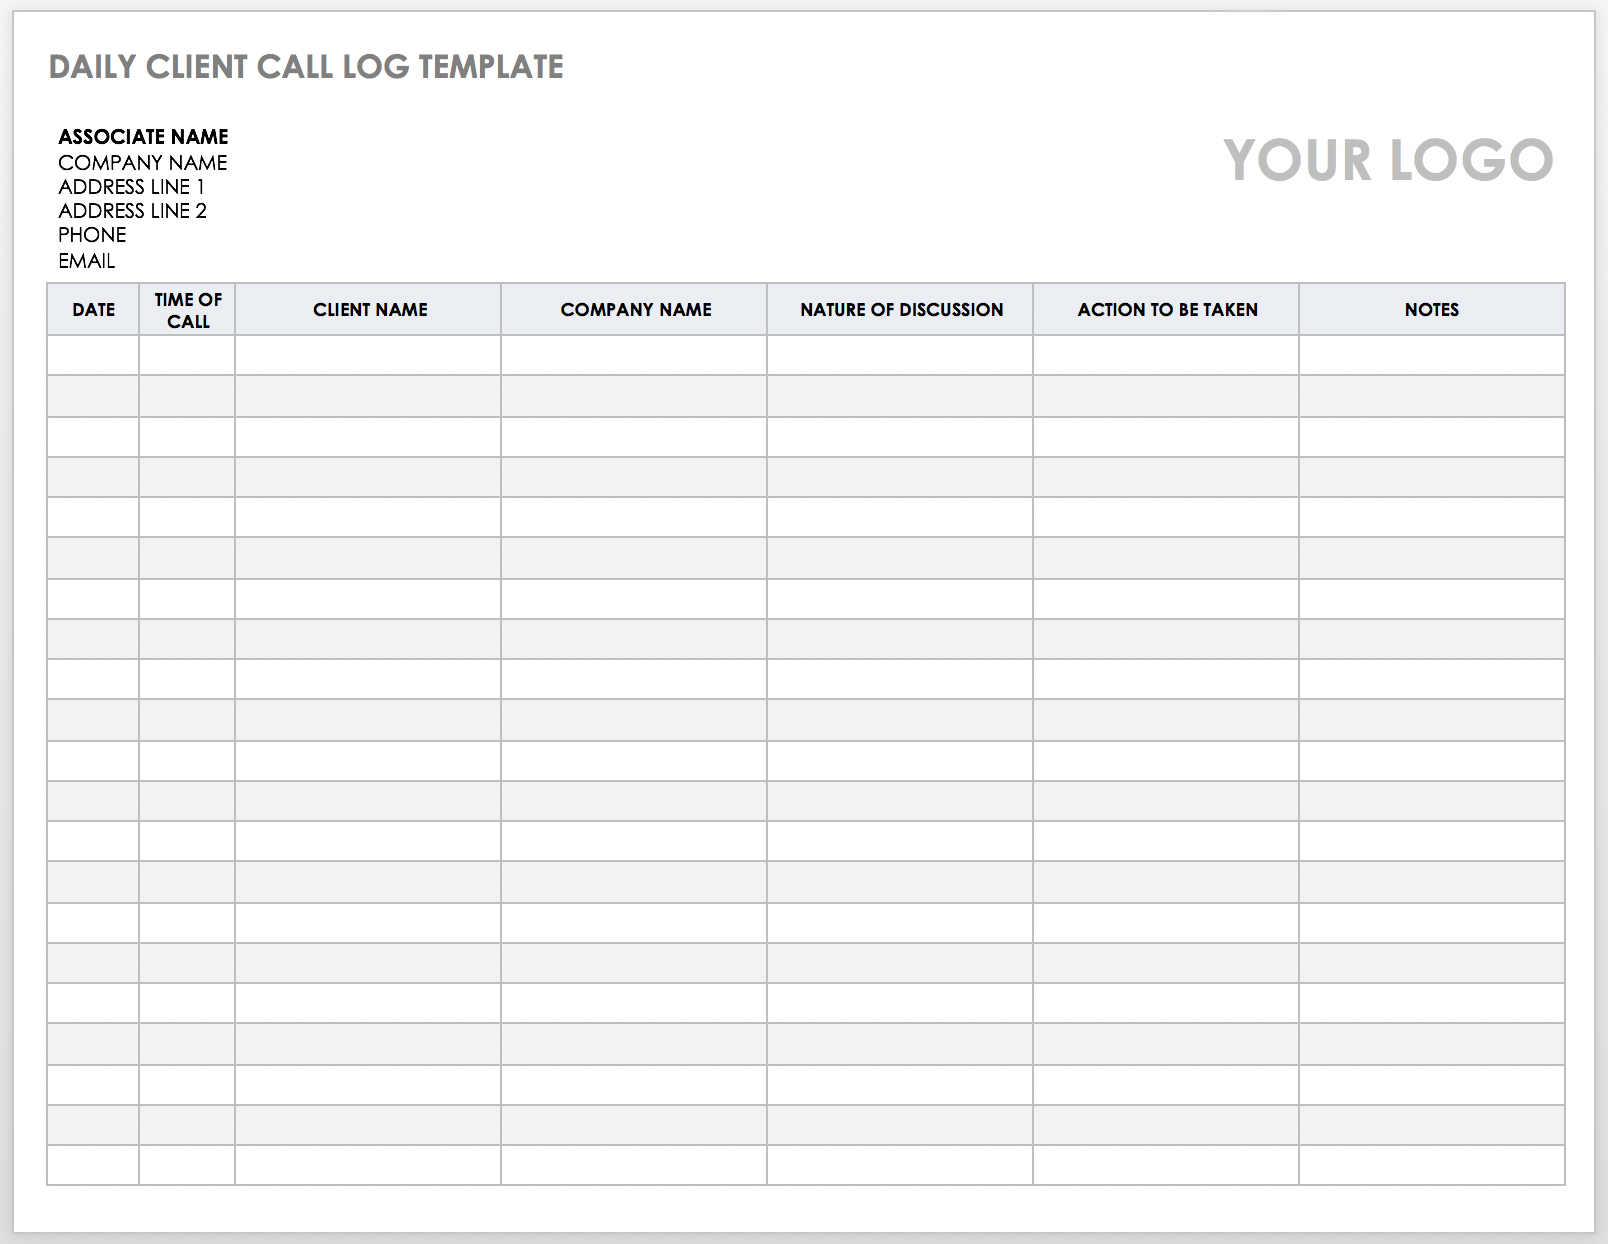 Daily Client Call Log Template